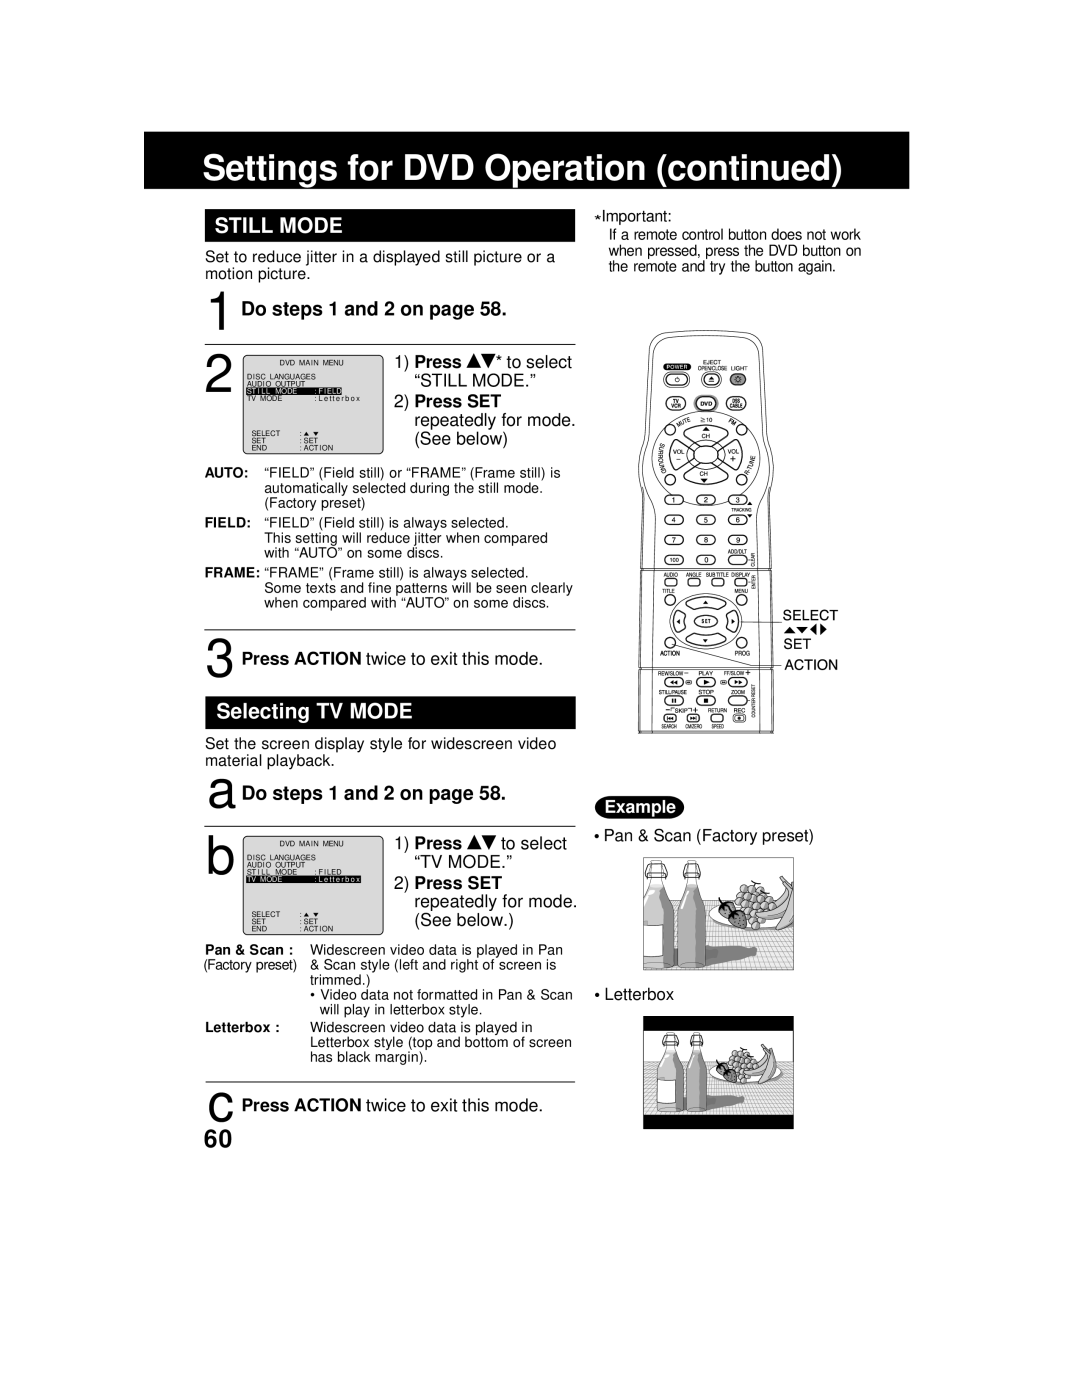 Panasonic AG 527DVDE Settings for DVD Operation continued, Still Mode, Selecting TV MODE, aDo steps 1 and 2 on page, Press 